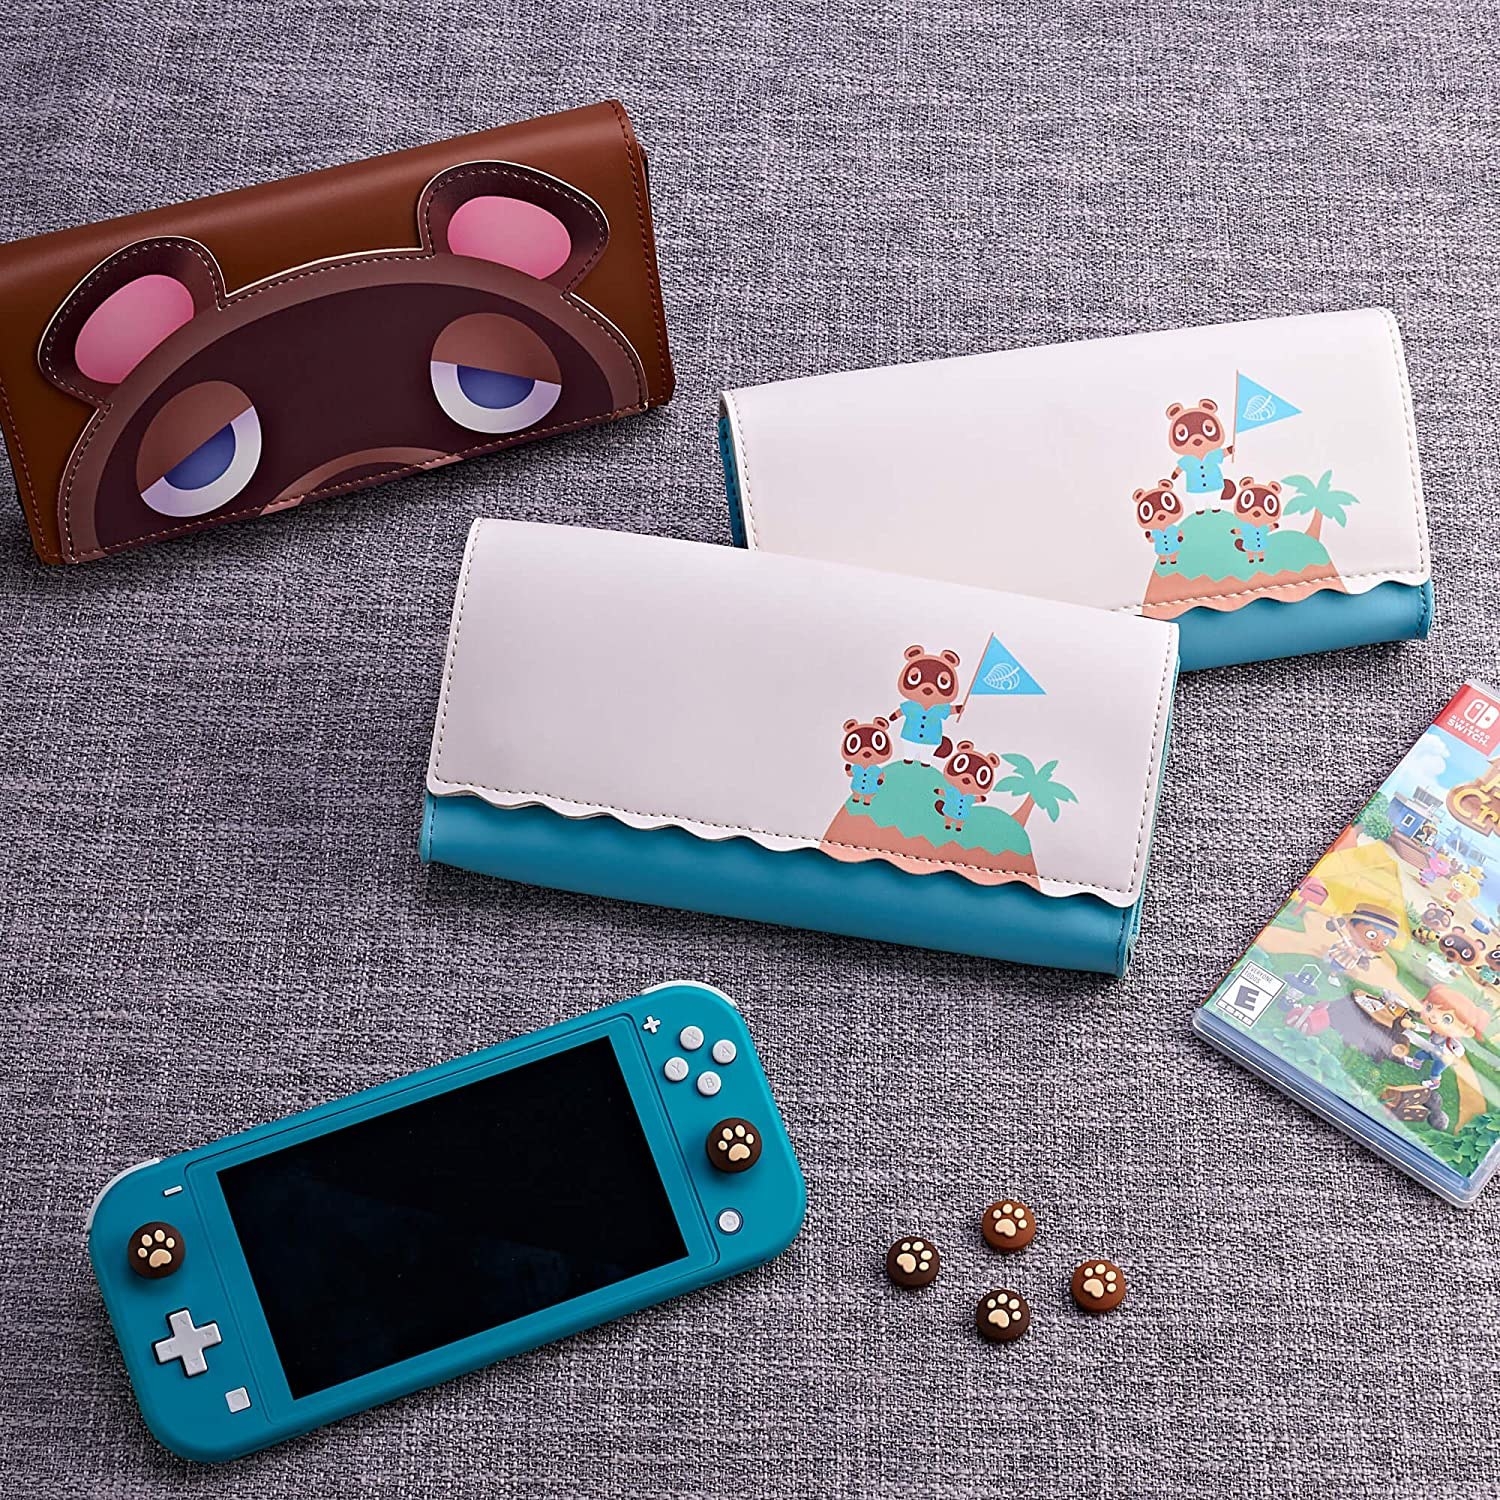 A switch next the different cases with a copy of animal crossing nearby